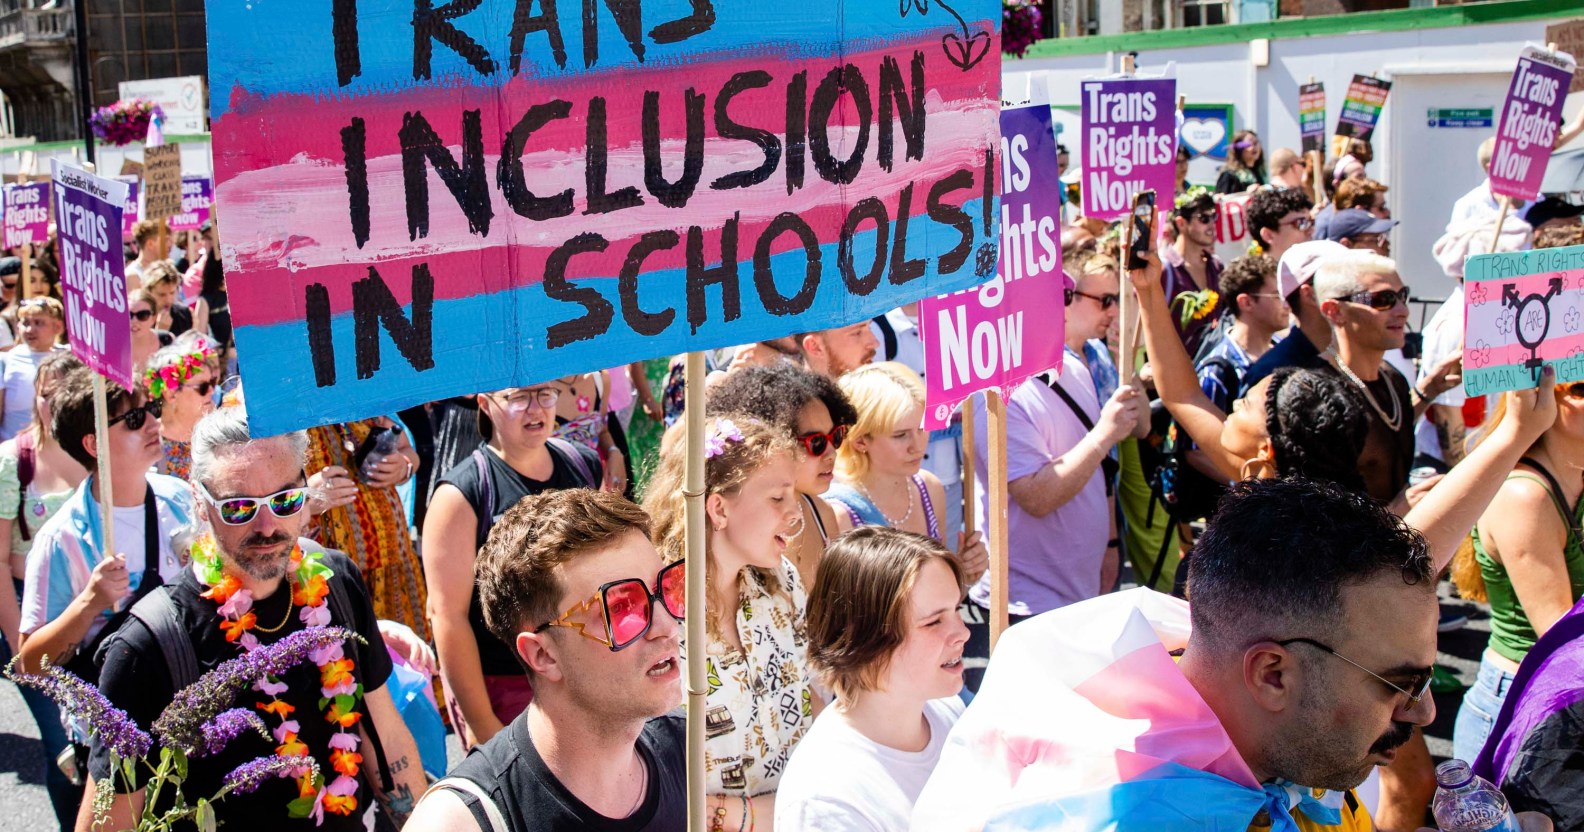 A photo from London Trans + Pride event shows protesters holding up a sign reading "trans inclusion in schools"